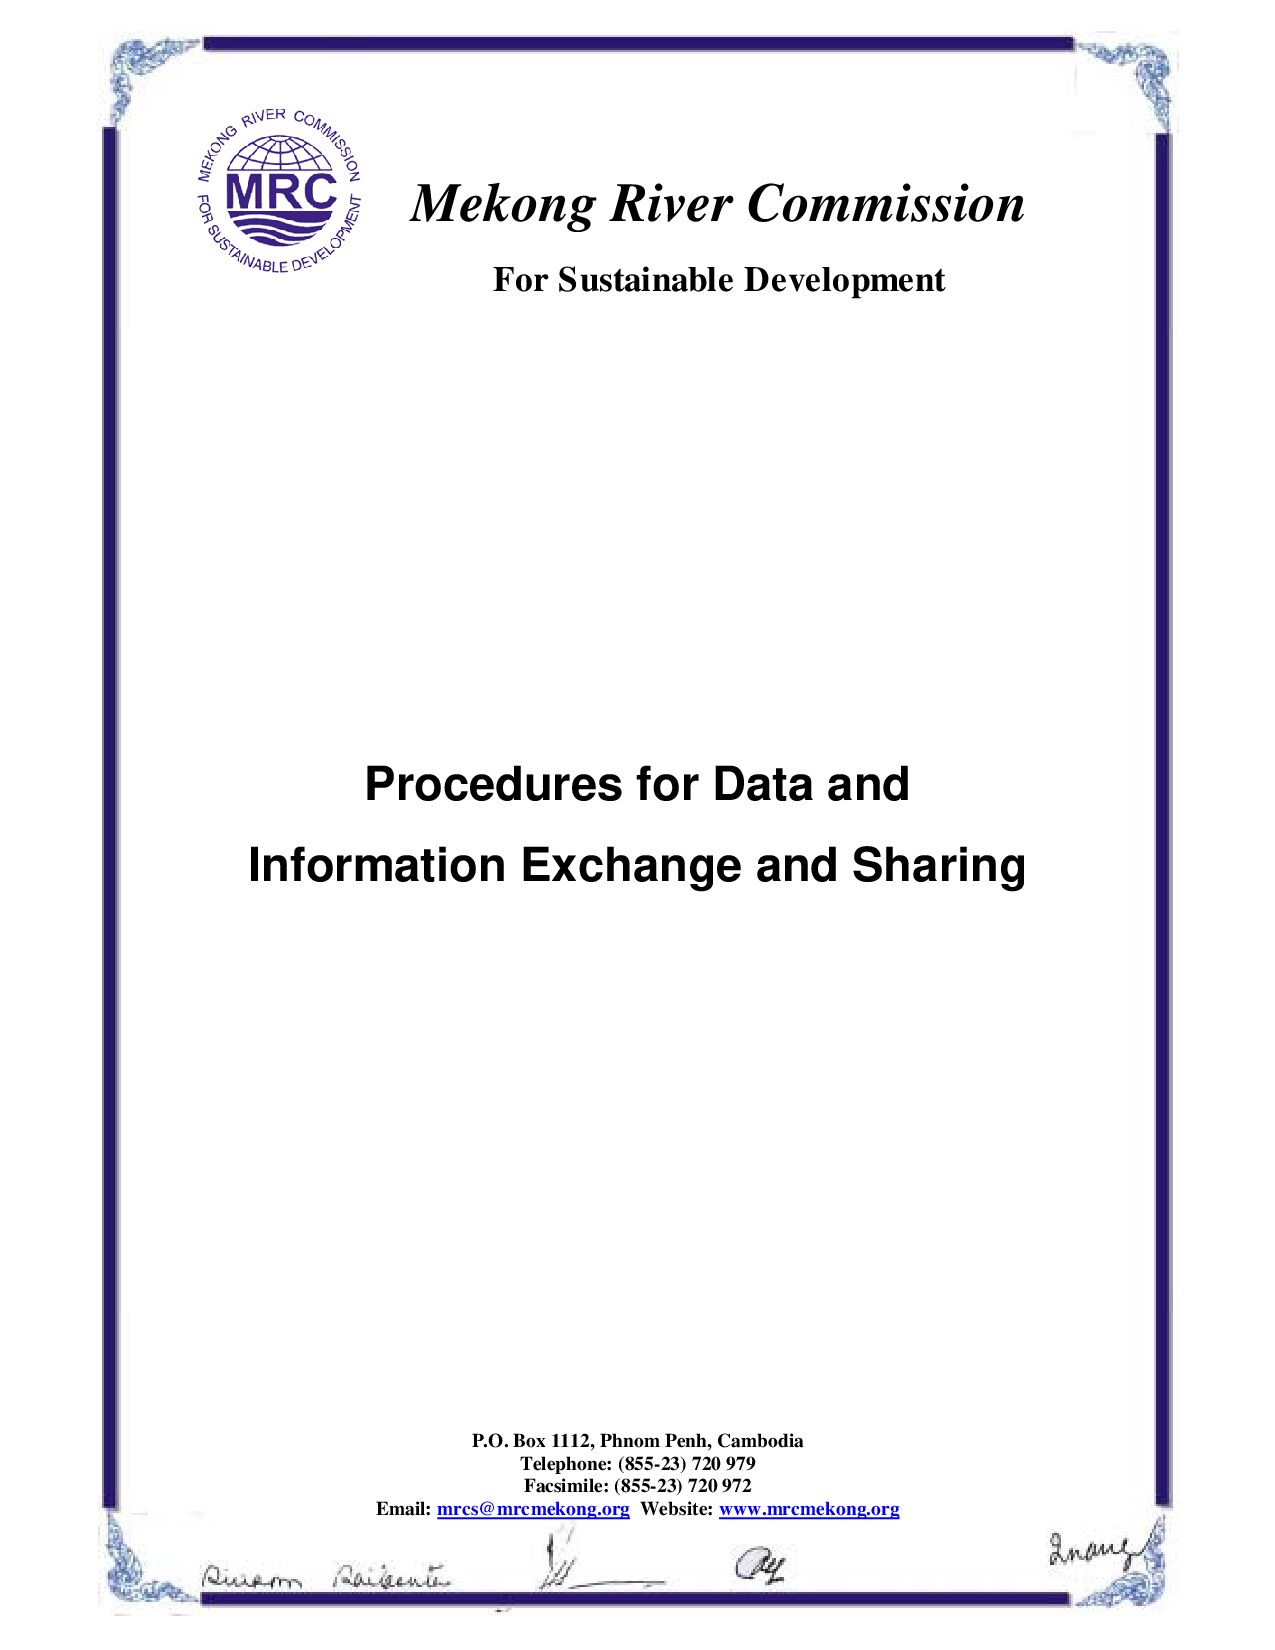 Procedures for Data and Information Exchange and Sharing